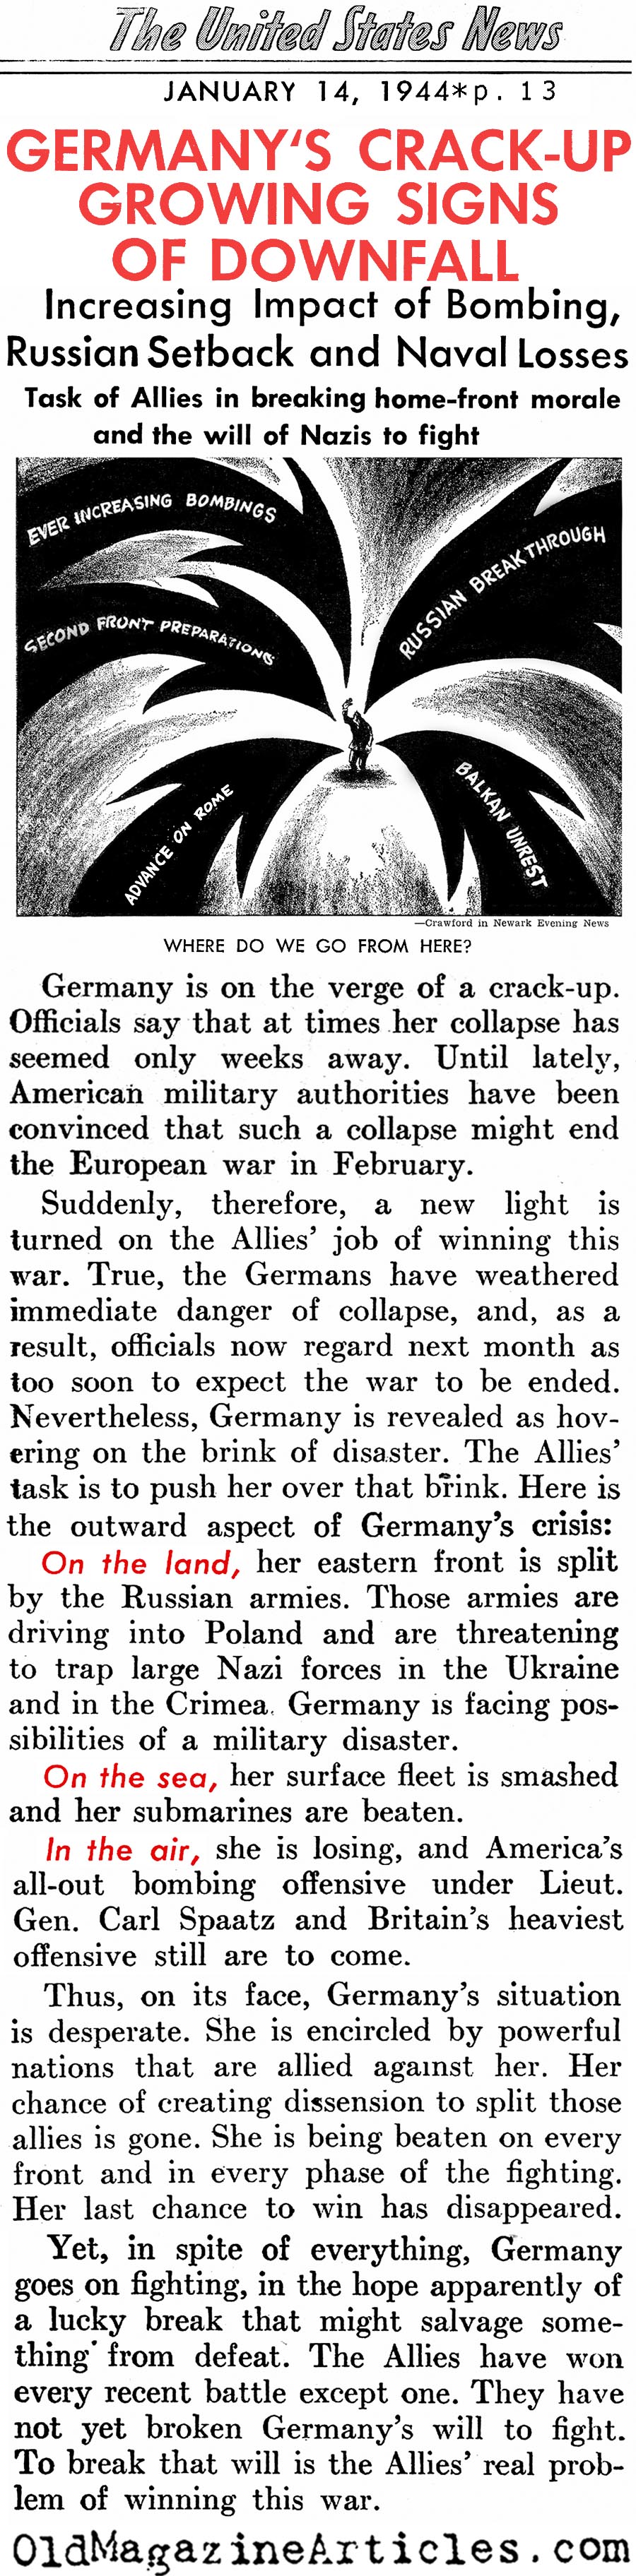 Anticipating Germany's Collapse (United States News, 1944)